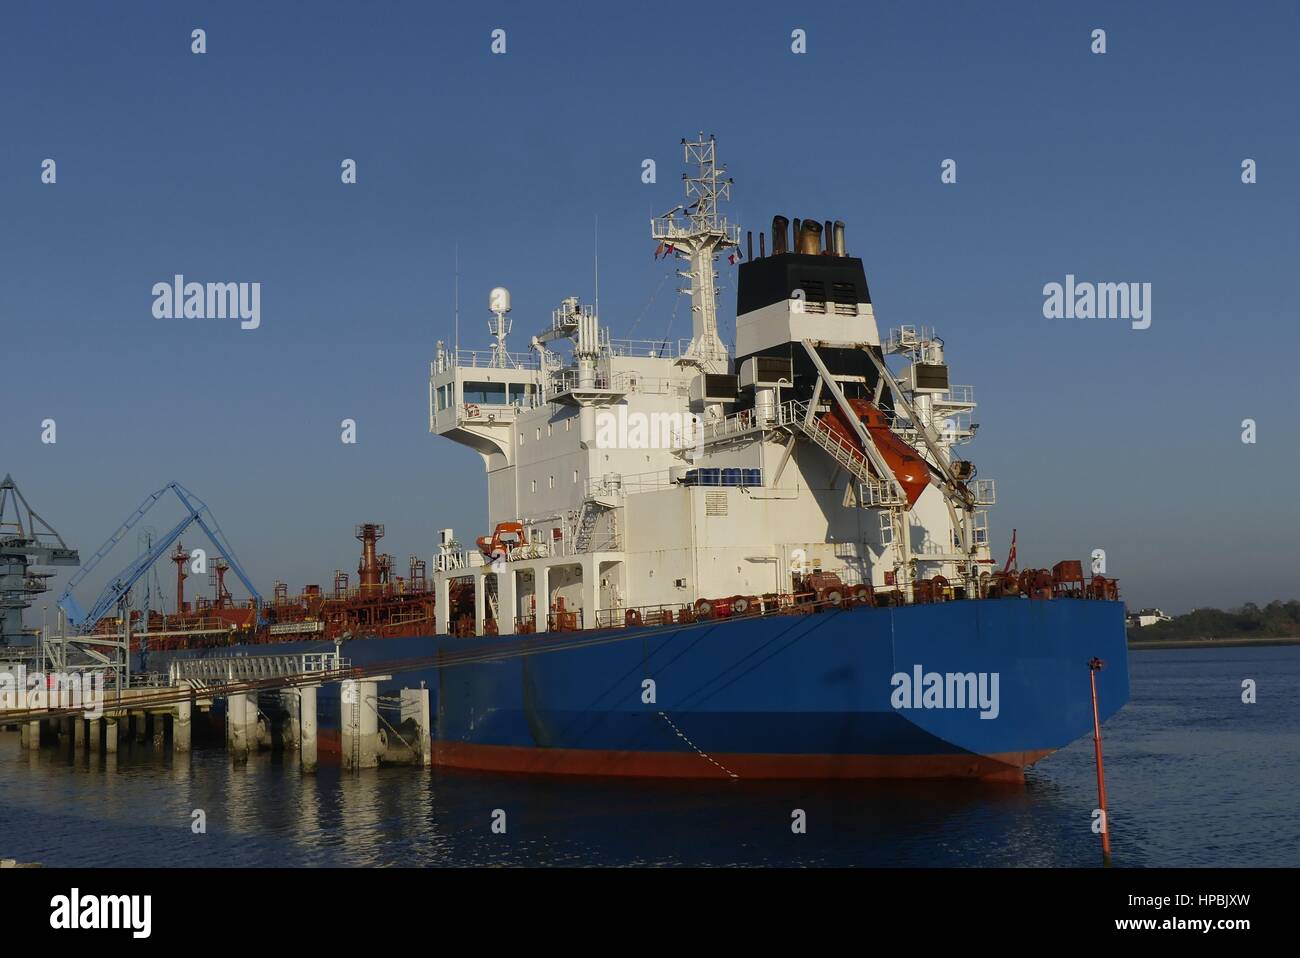 Products Tanker discharging at the Oil Terminal with blue hull and red main deck on sunny day. Stock Photo